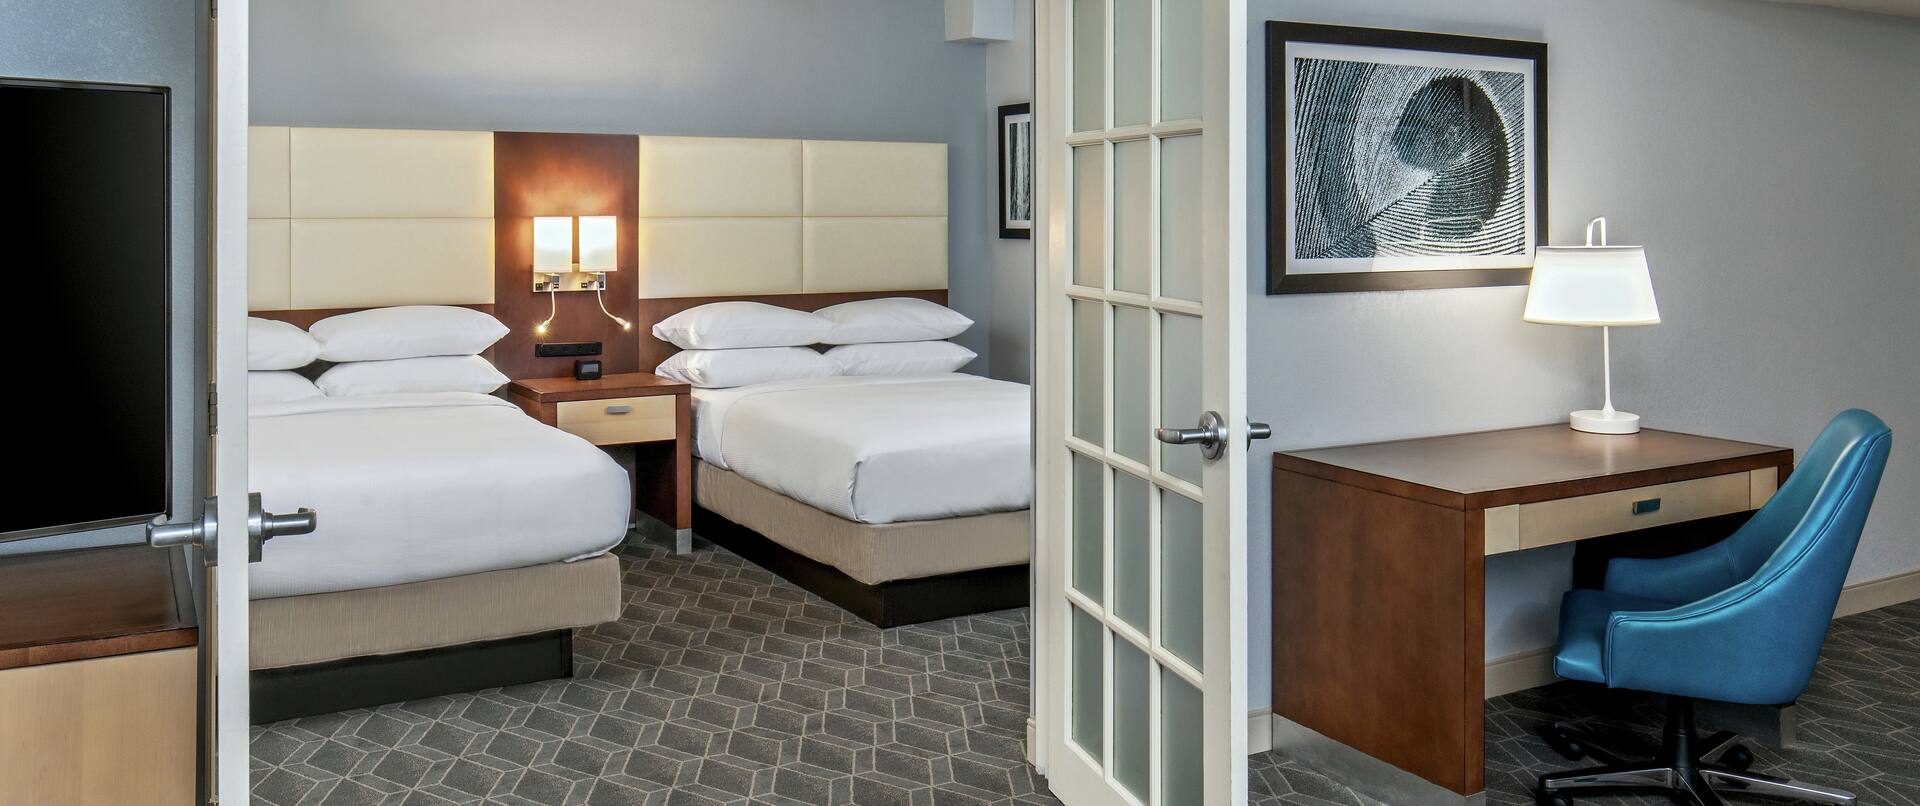 Double Double Two Room Guestroom Suite